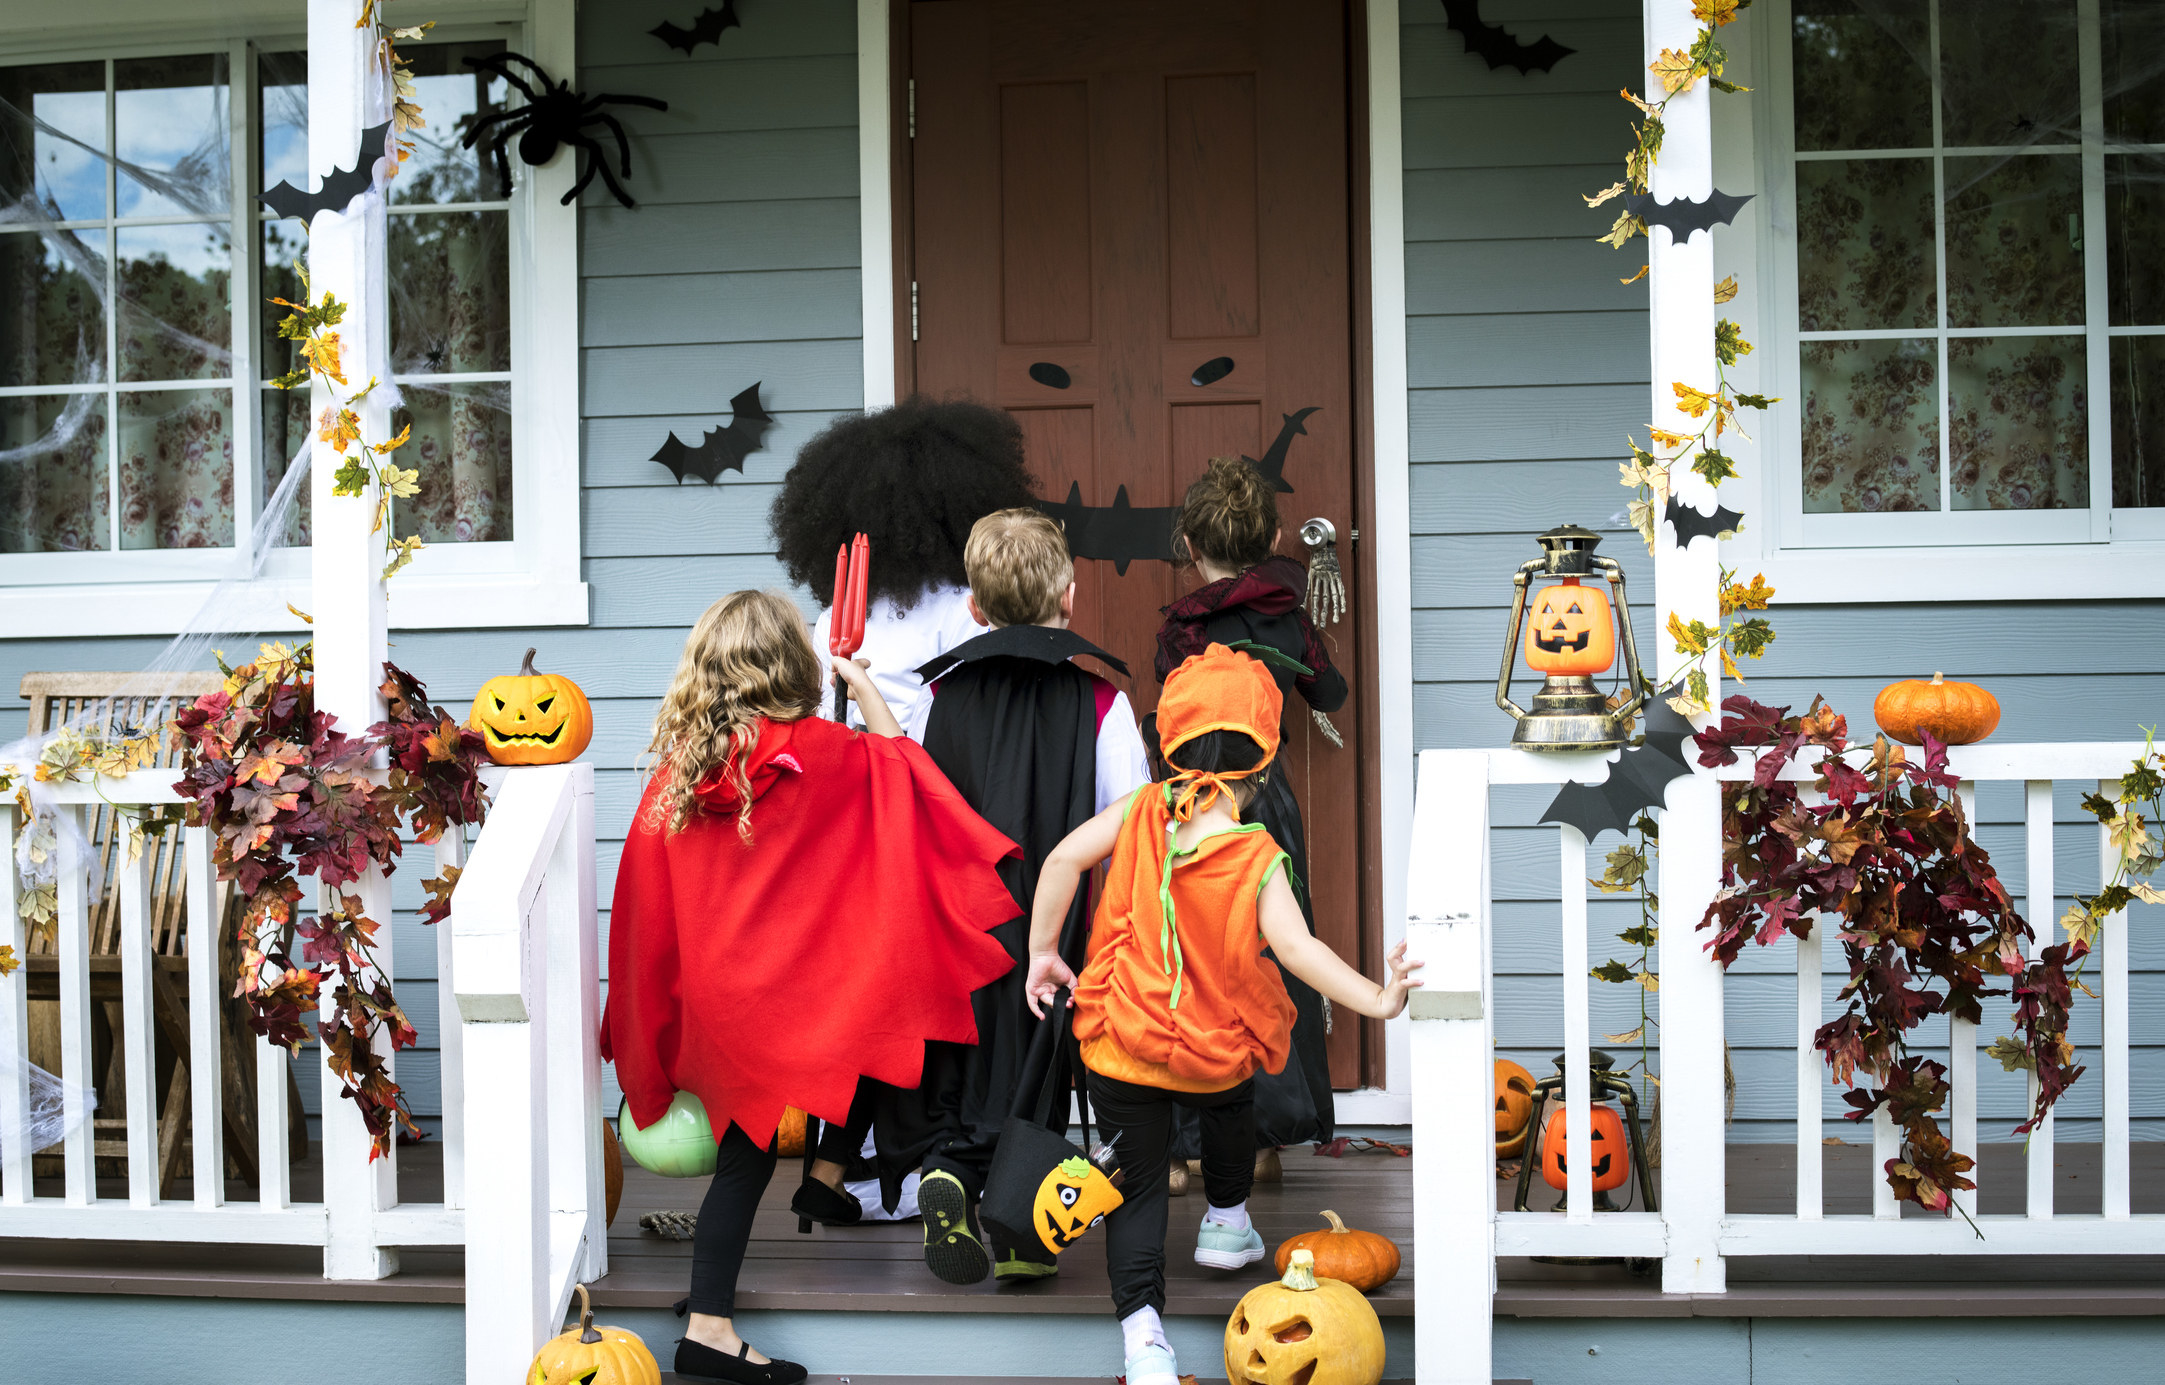 Young kids trick or treating during Halloween.